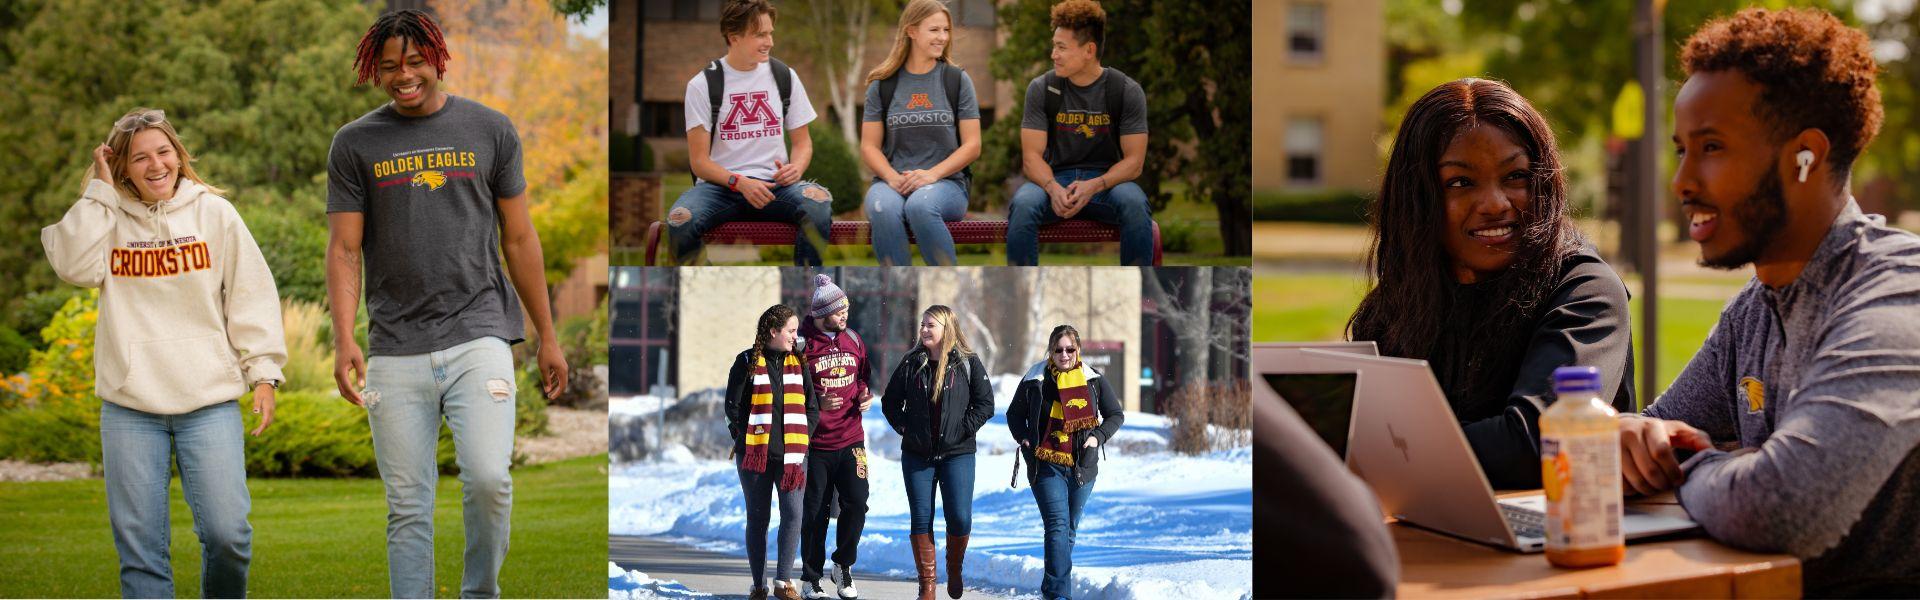 Diverse groups of students on campus in a collage